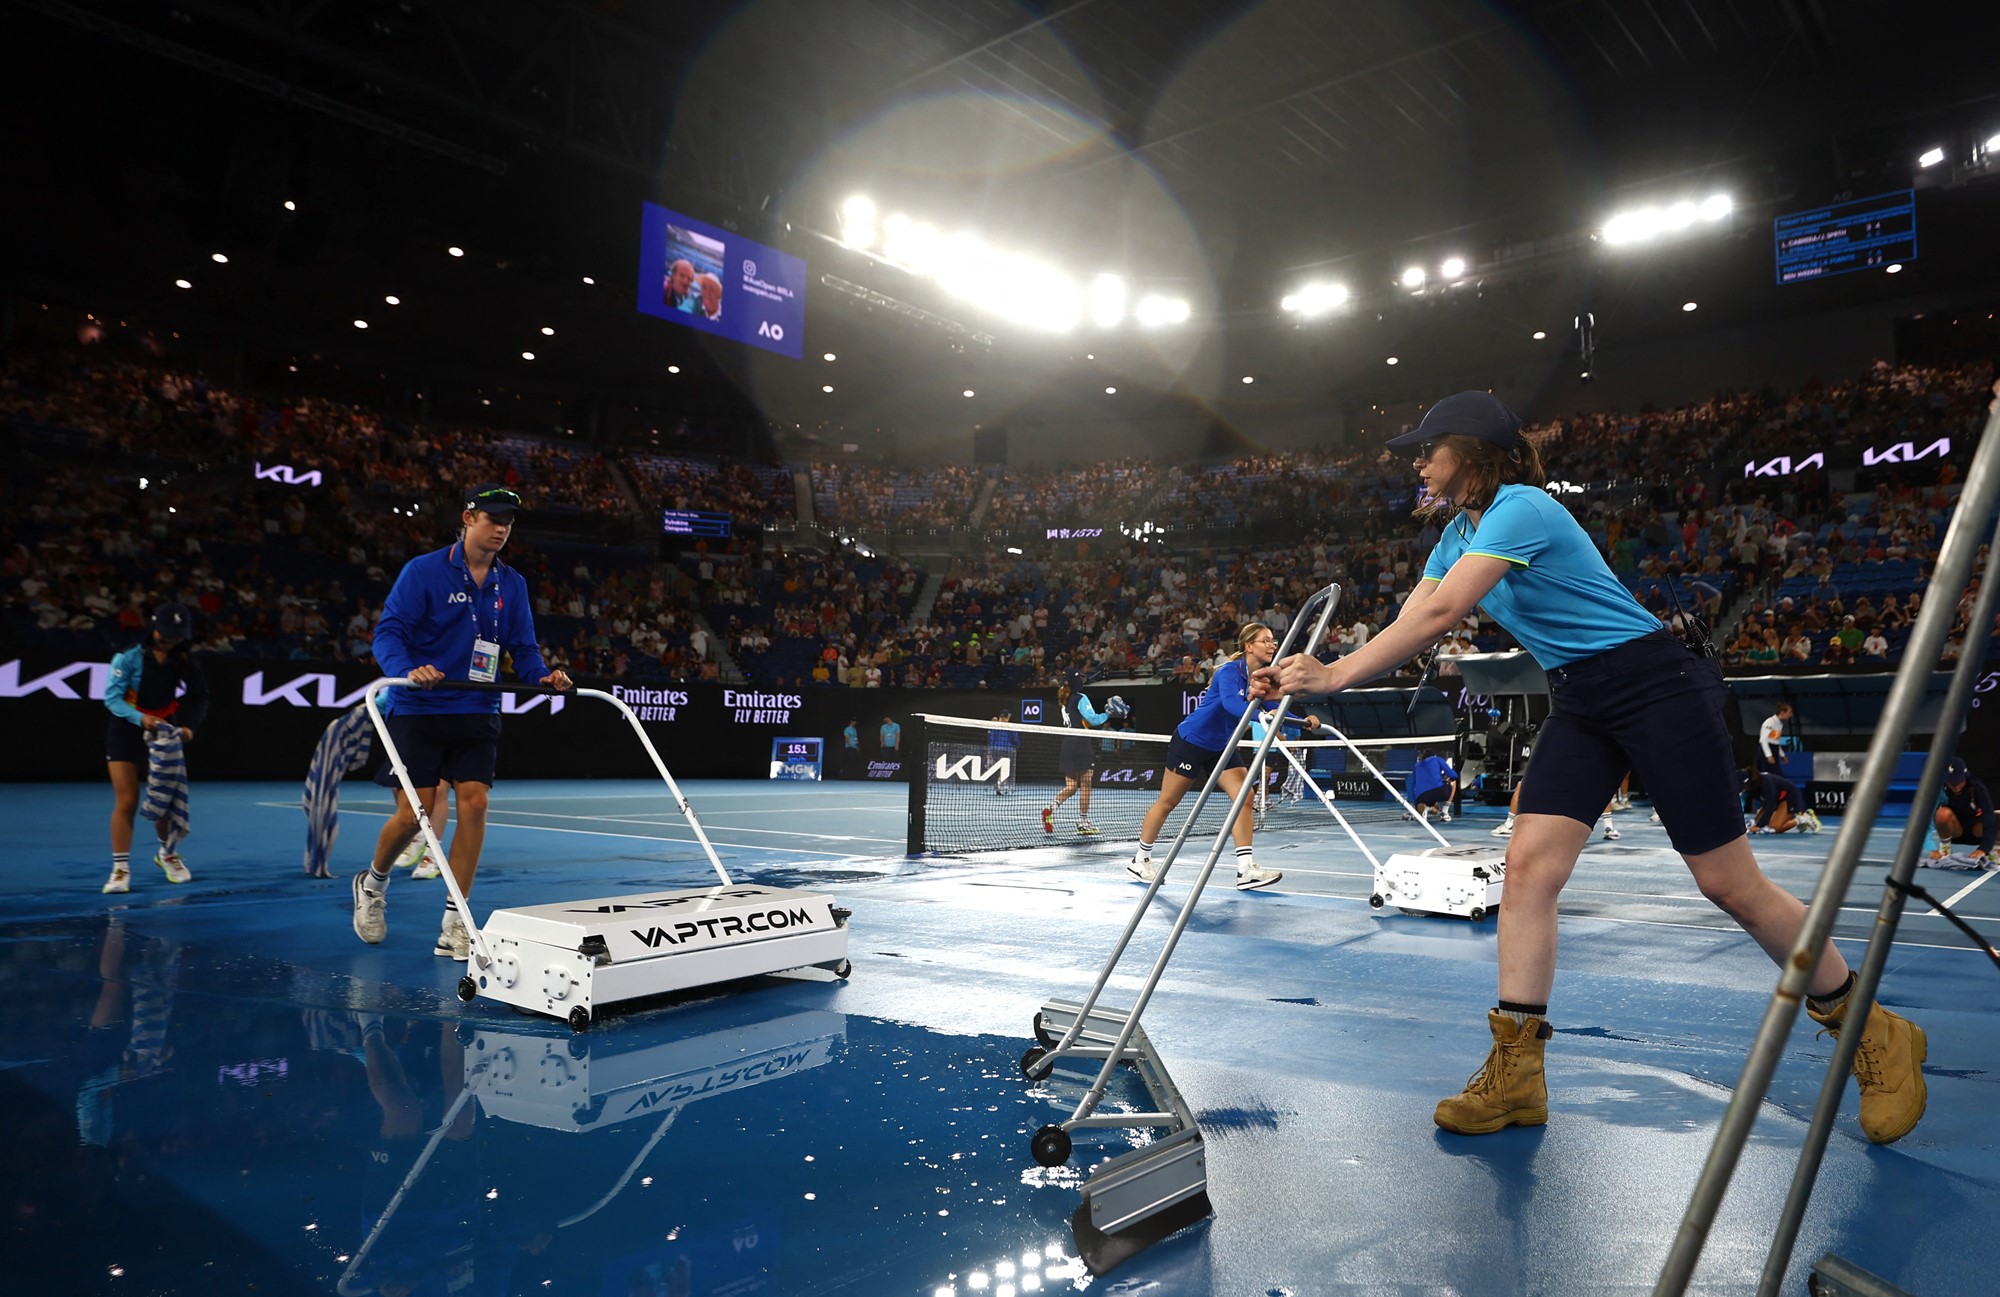 Ballkids and tournament staff dry Rod Laver Arena.